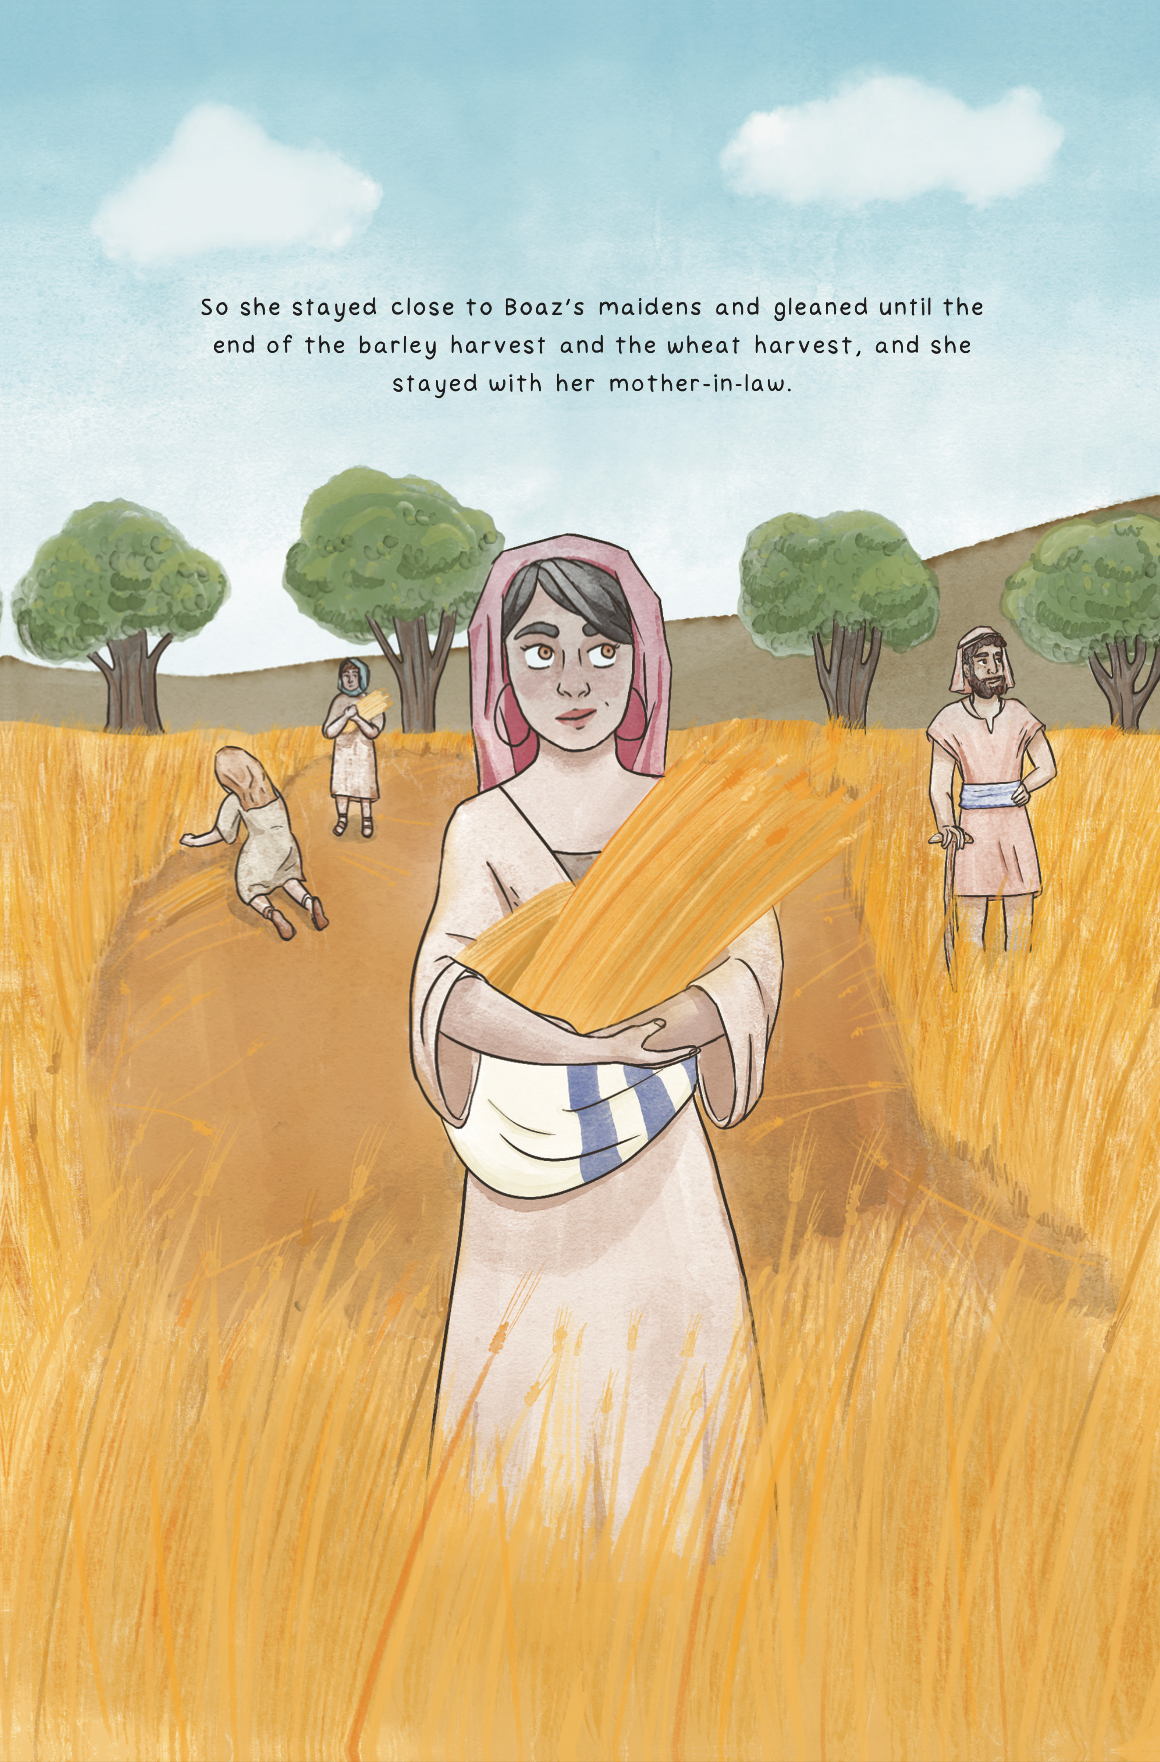 The Illustrated Book of Ruth